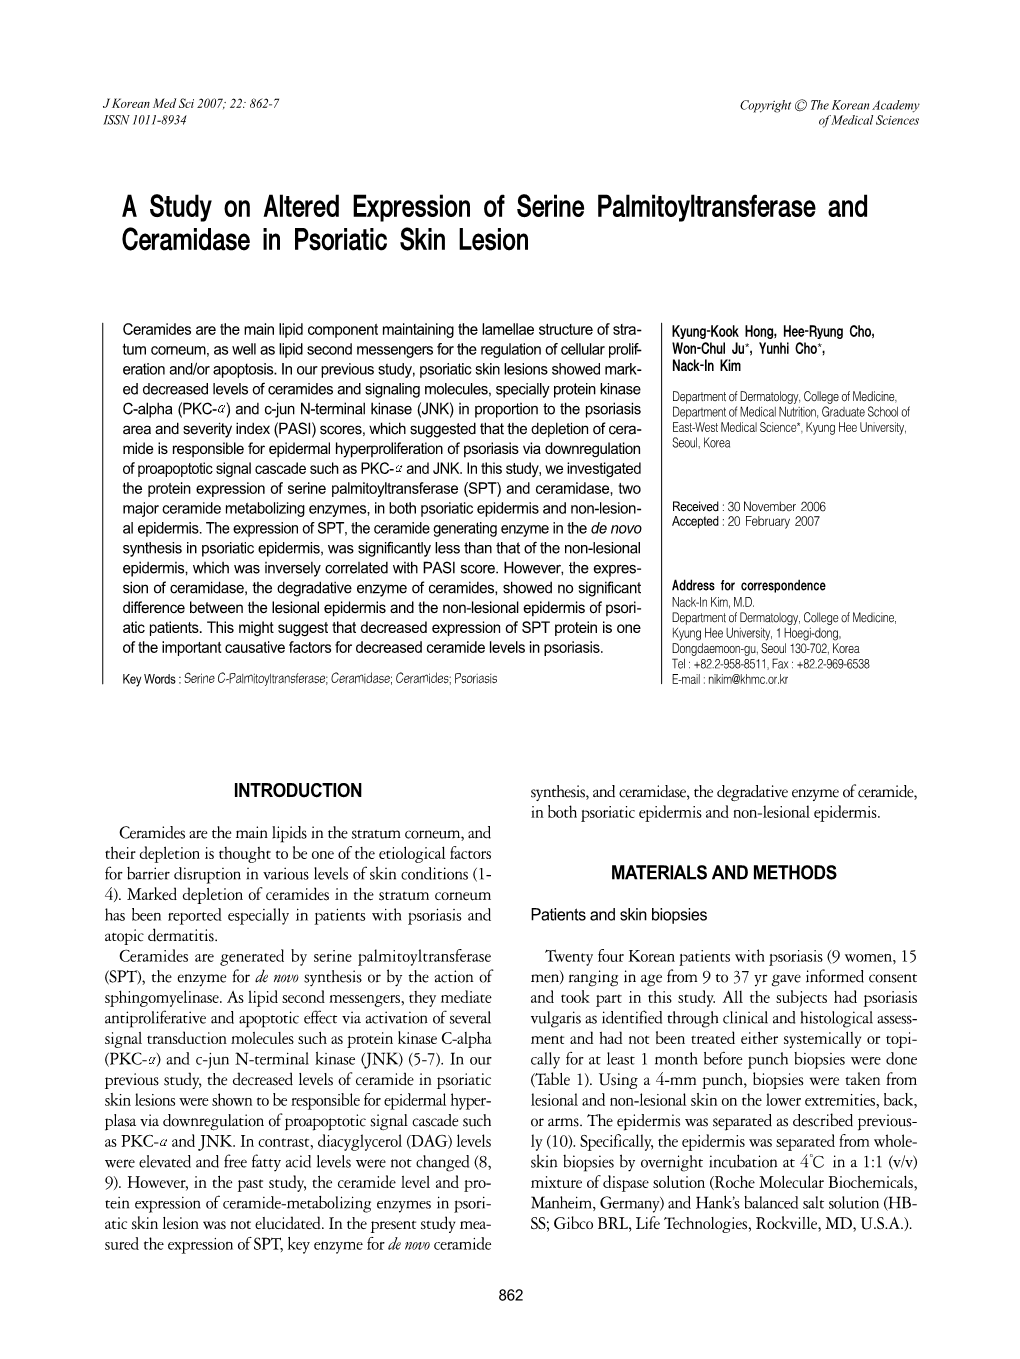 A Study on Altered Expression of Serine Palmitoyltransferase and Ceramidase in Psoriatic Skin Lesion